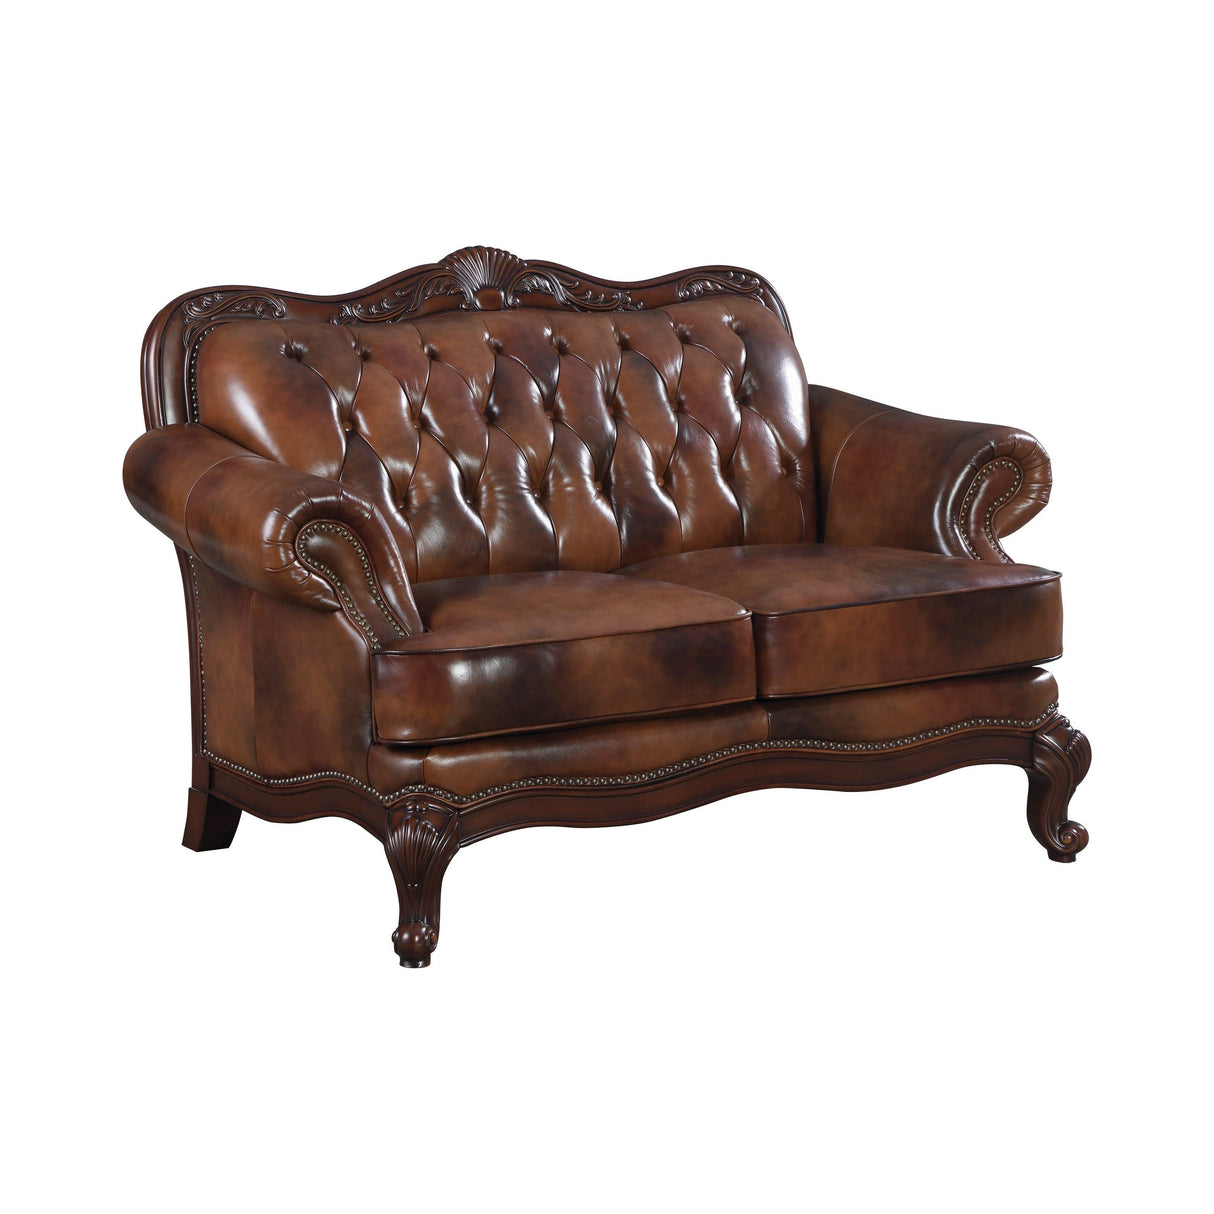 Victoria Upholstered Tufted Sofa, Loveseat and Chair Warm Brown by Coaster Furniture